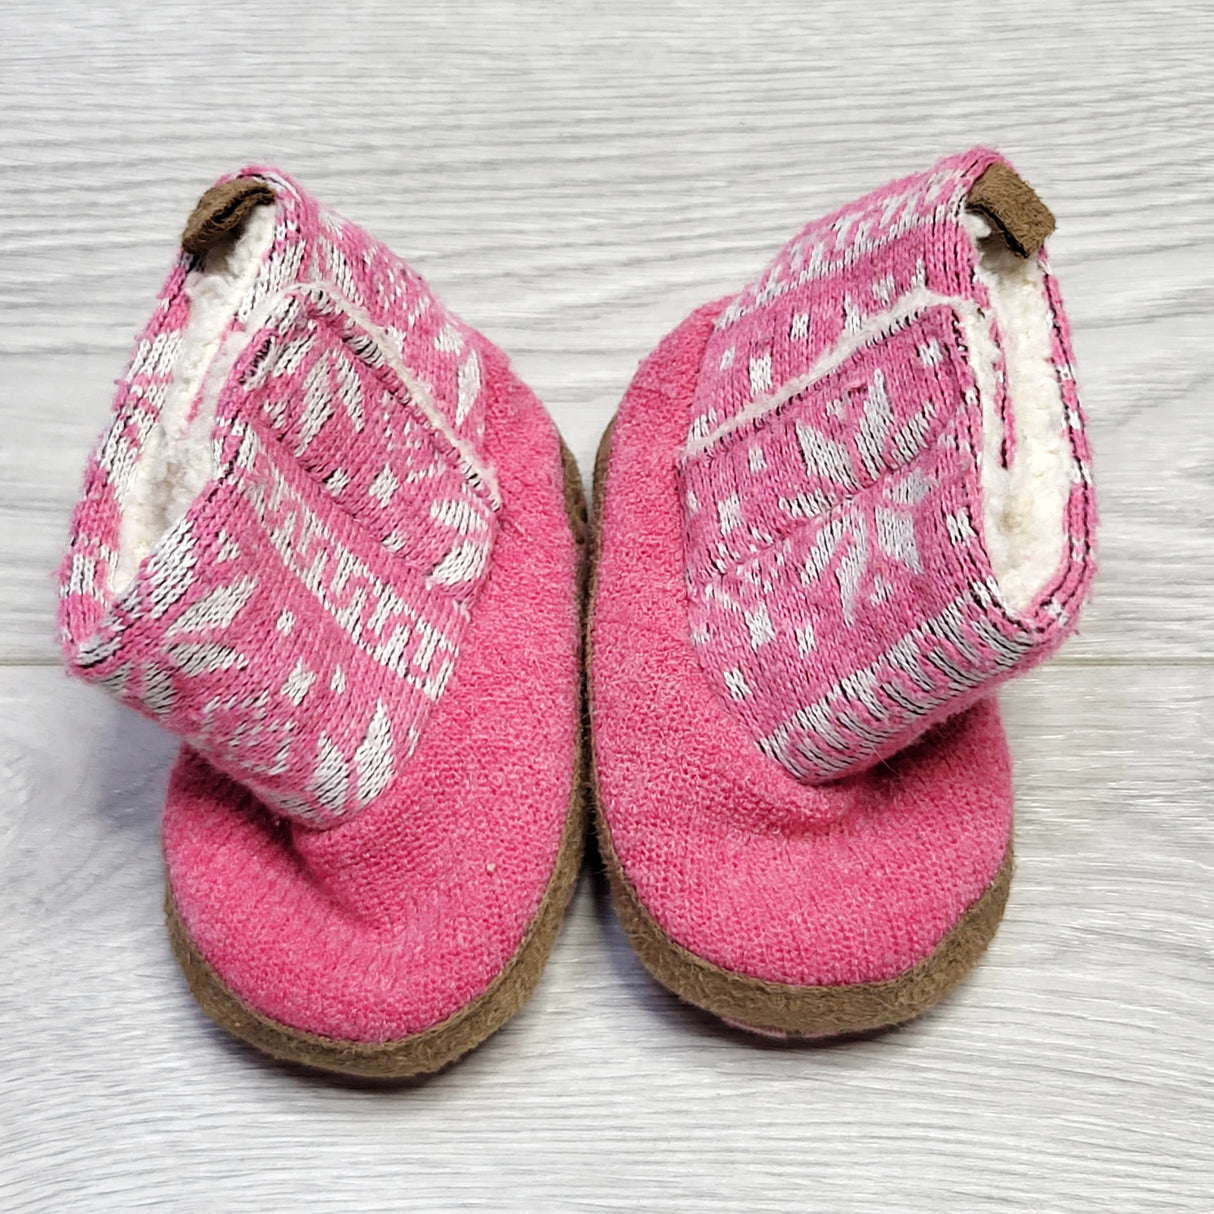 MSNDS11 - Zara pink knit soft soled booties. Sizes like 3-6 months